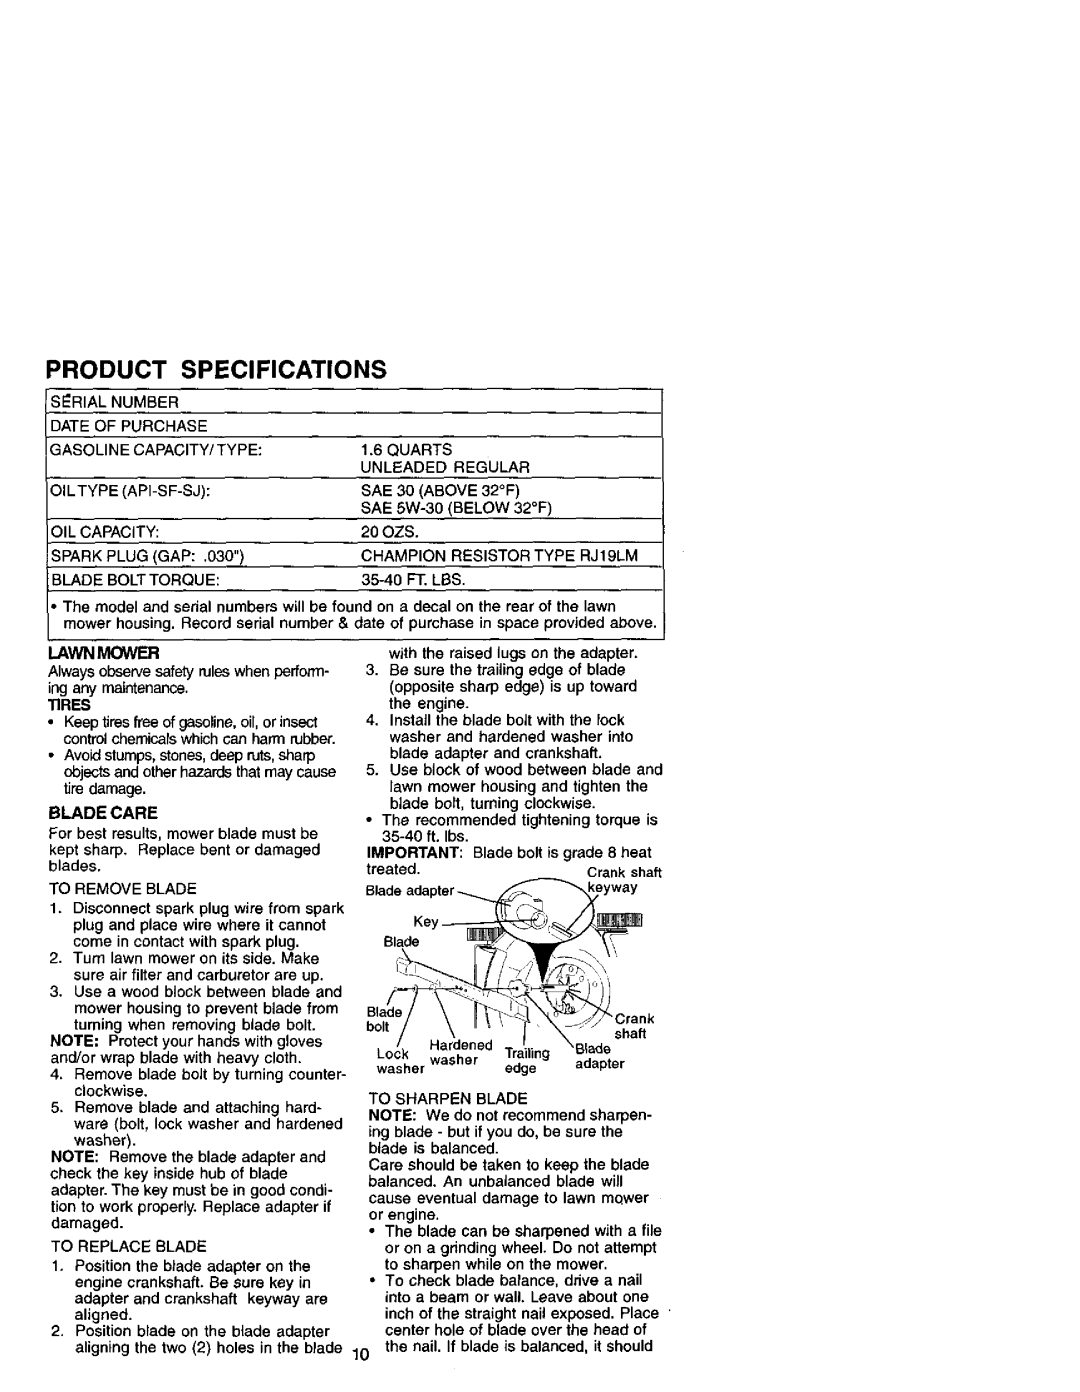 Craftsman 944.36153 owner manual Product Specifications 